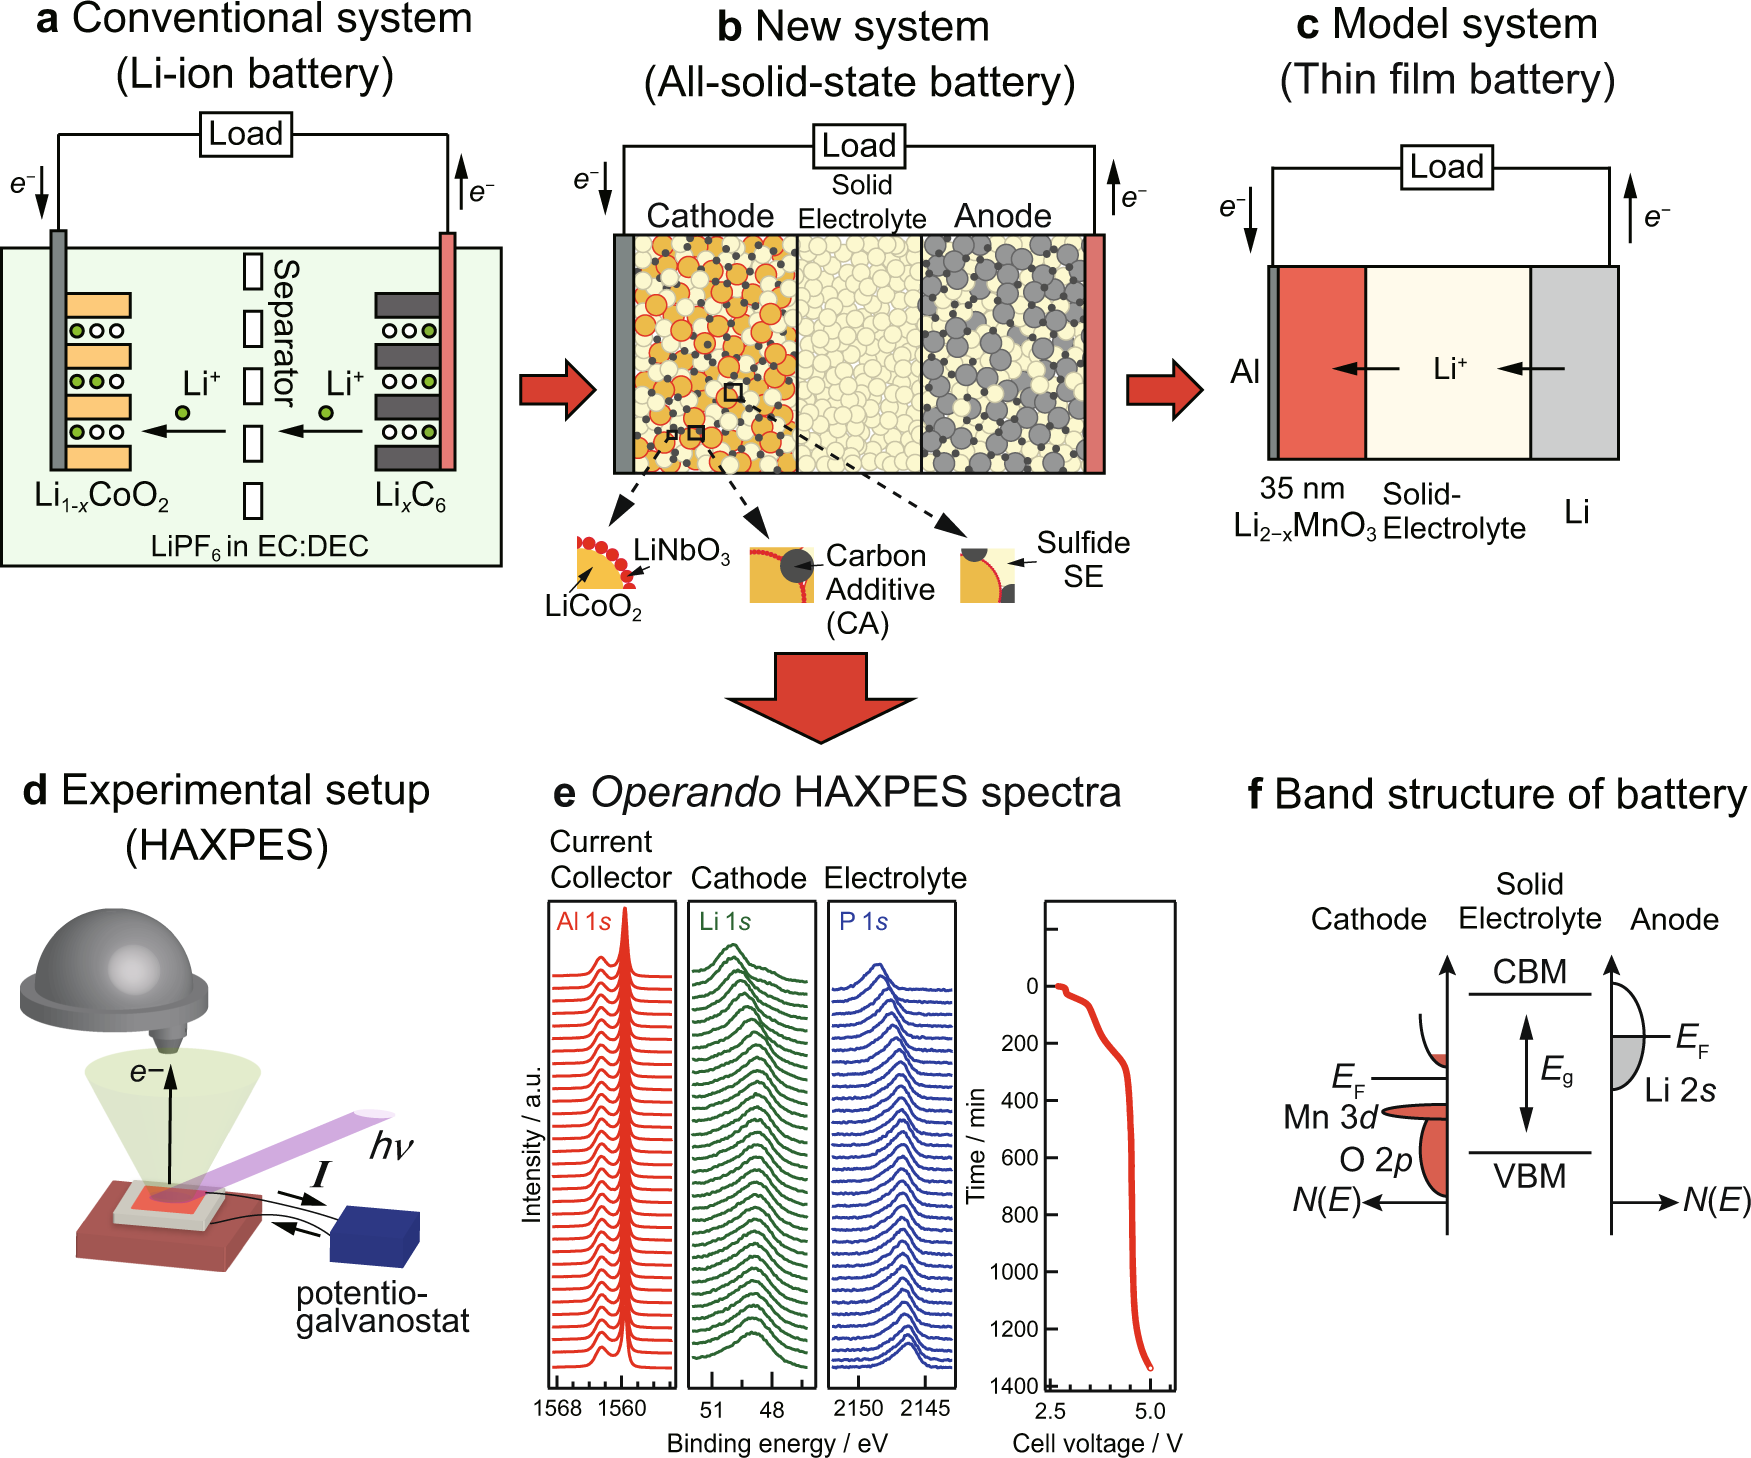 Operando analysis of electronic band structure in an all-solid-state  thin-film battery | Communications Chemistry